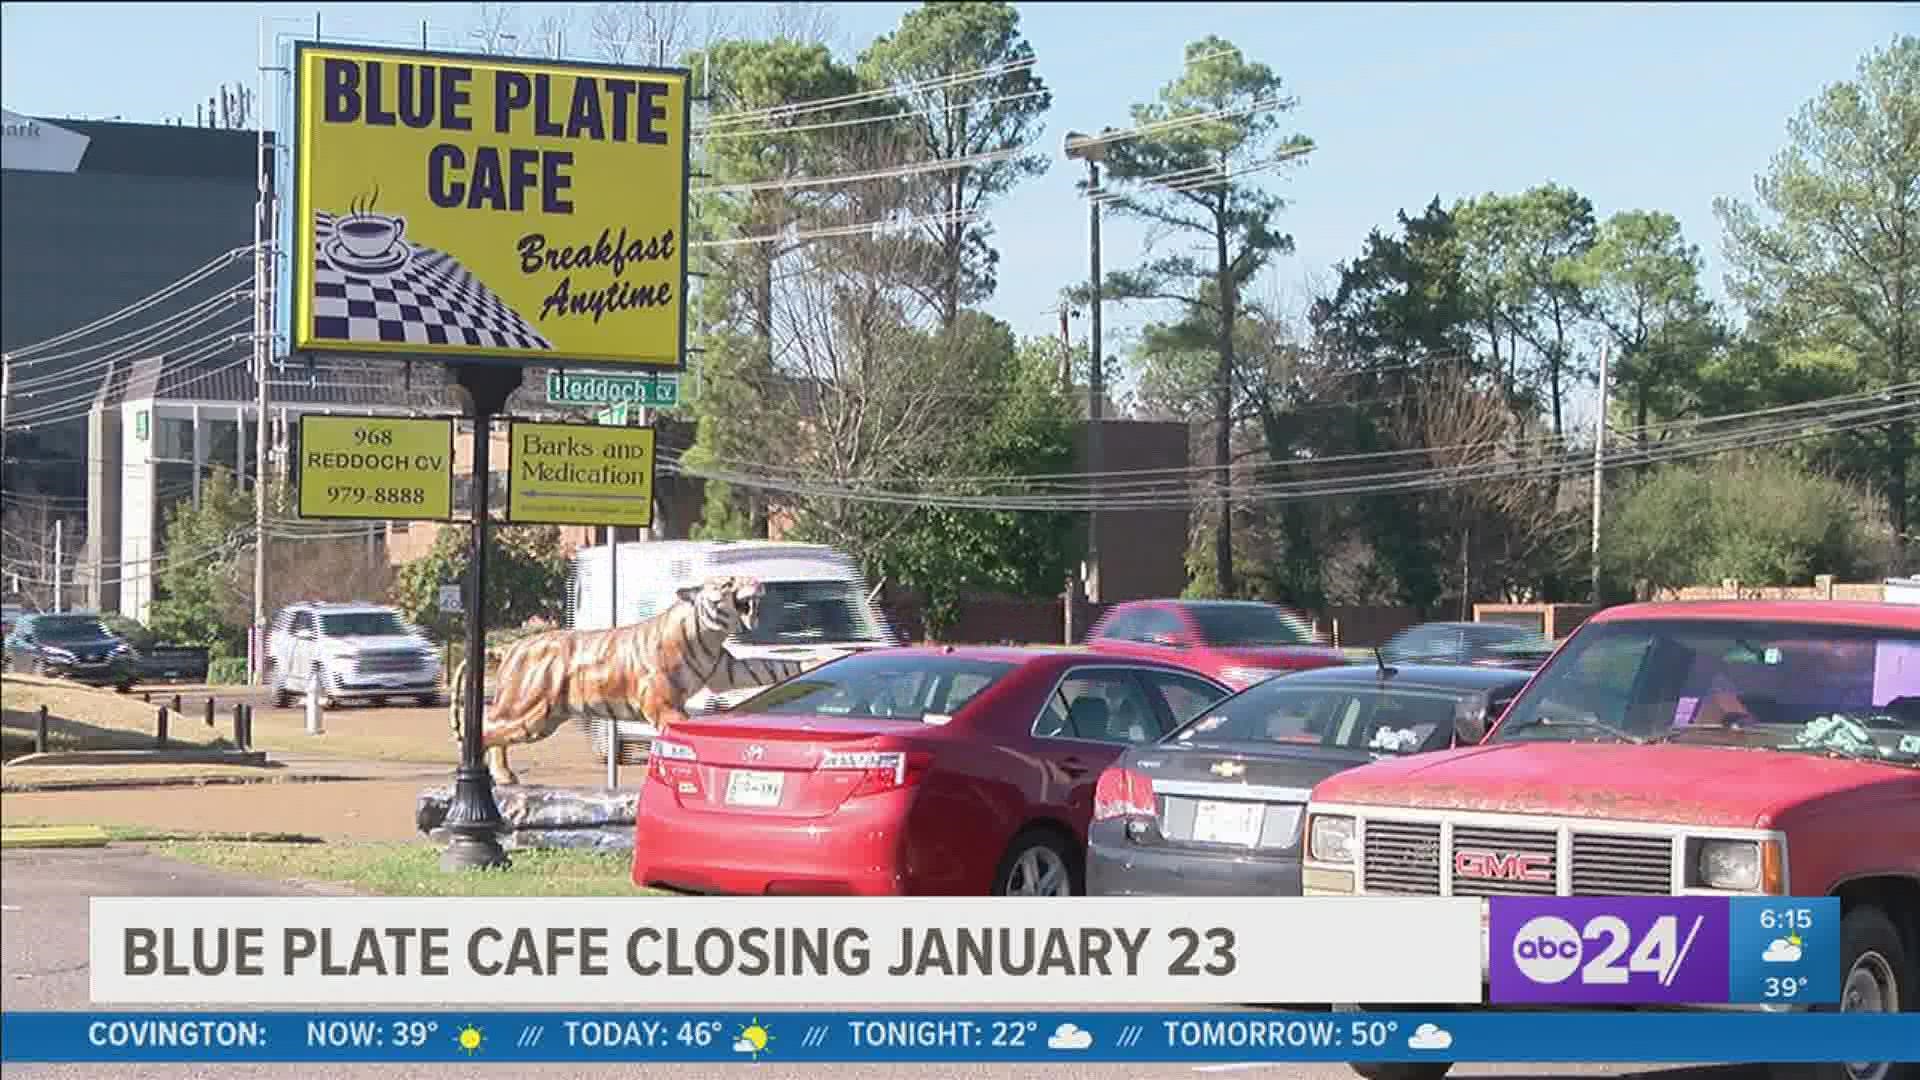 The doors of the Blue Plate Cafe will be shut on January 23, months after its owner Mike Richmond died of cancer.